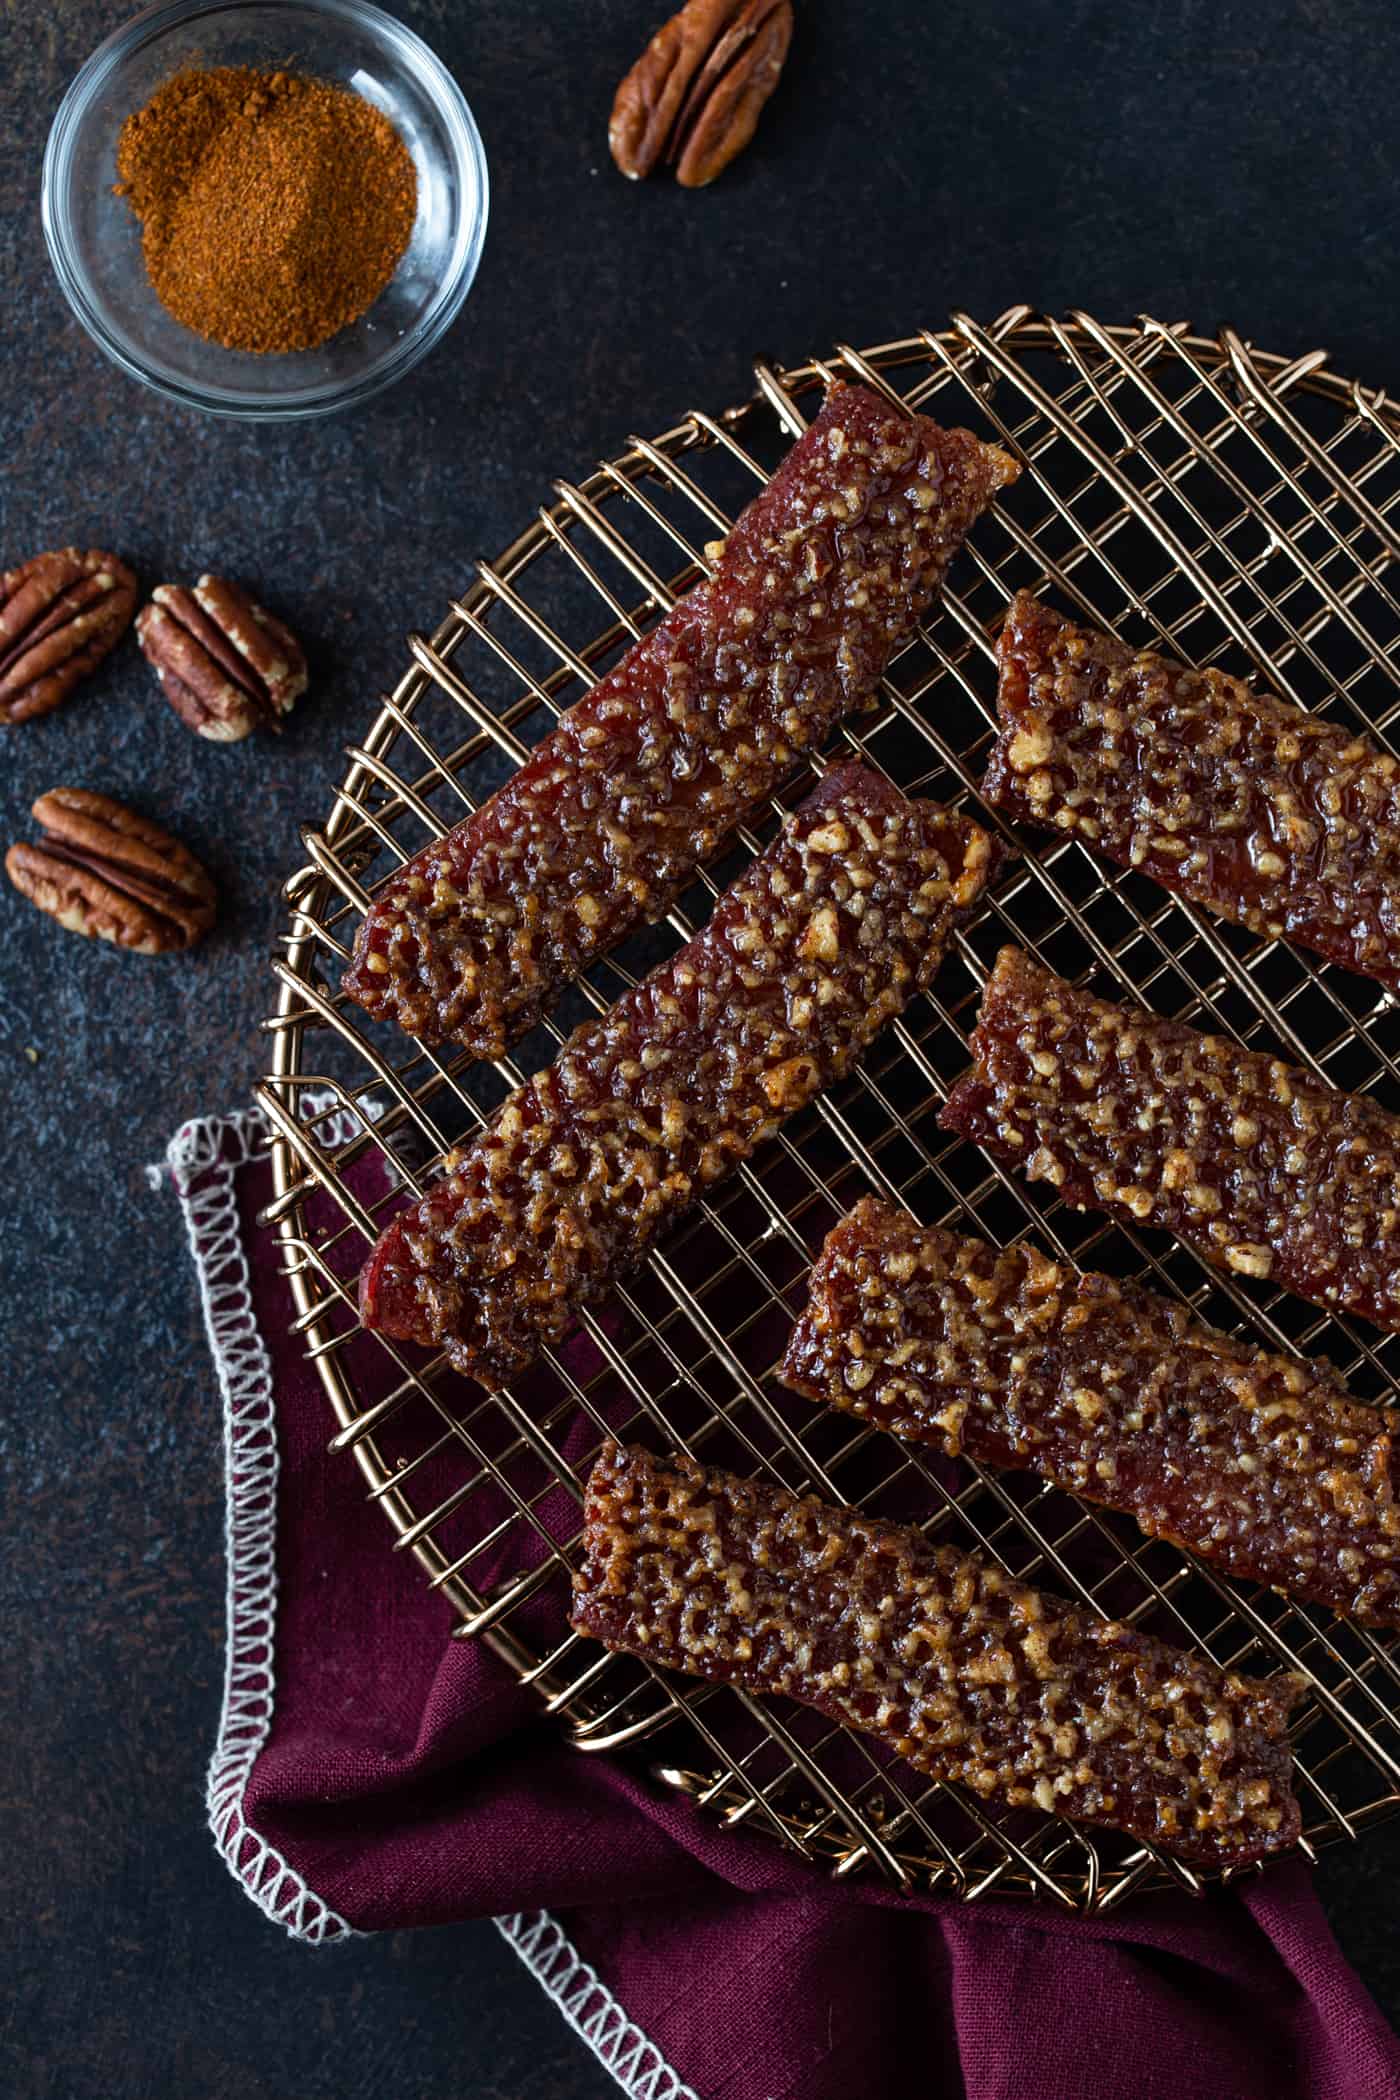 Candied bacon on a rose gold trivet with pecans on the side.